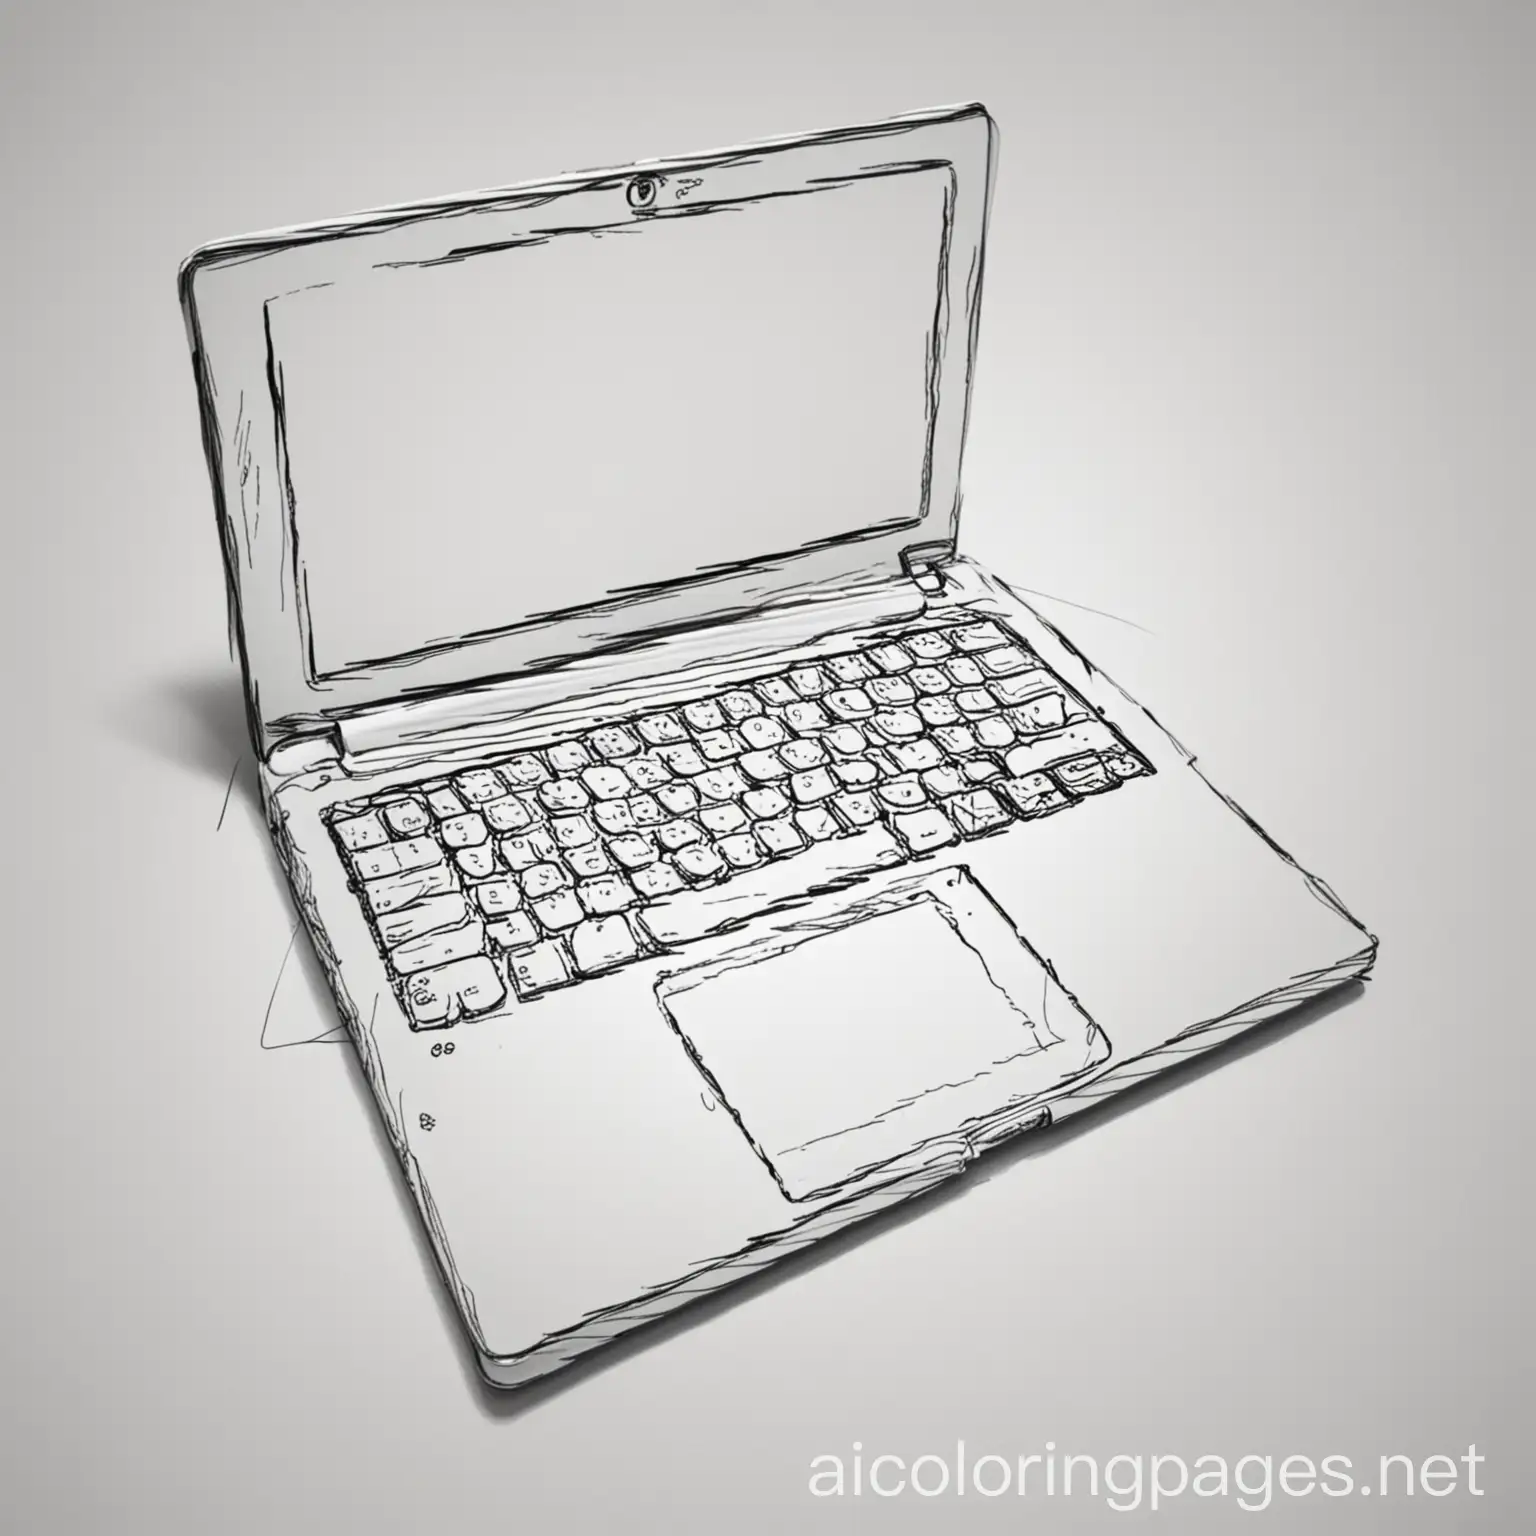 Simple-Black-and-White-Laptop-Coloring-Page-for-Kids